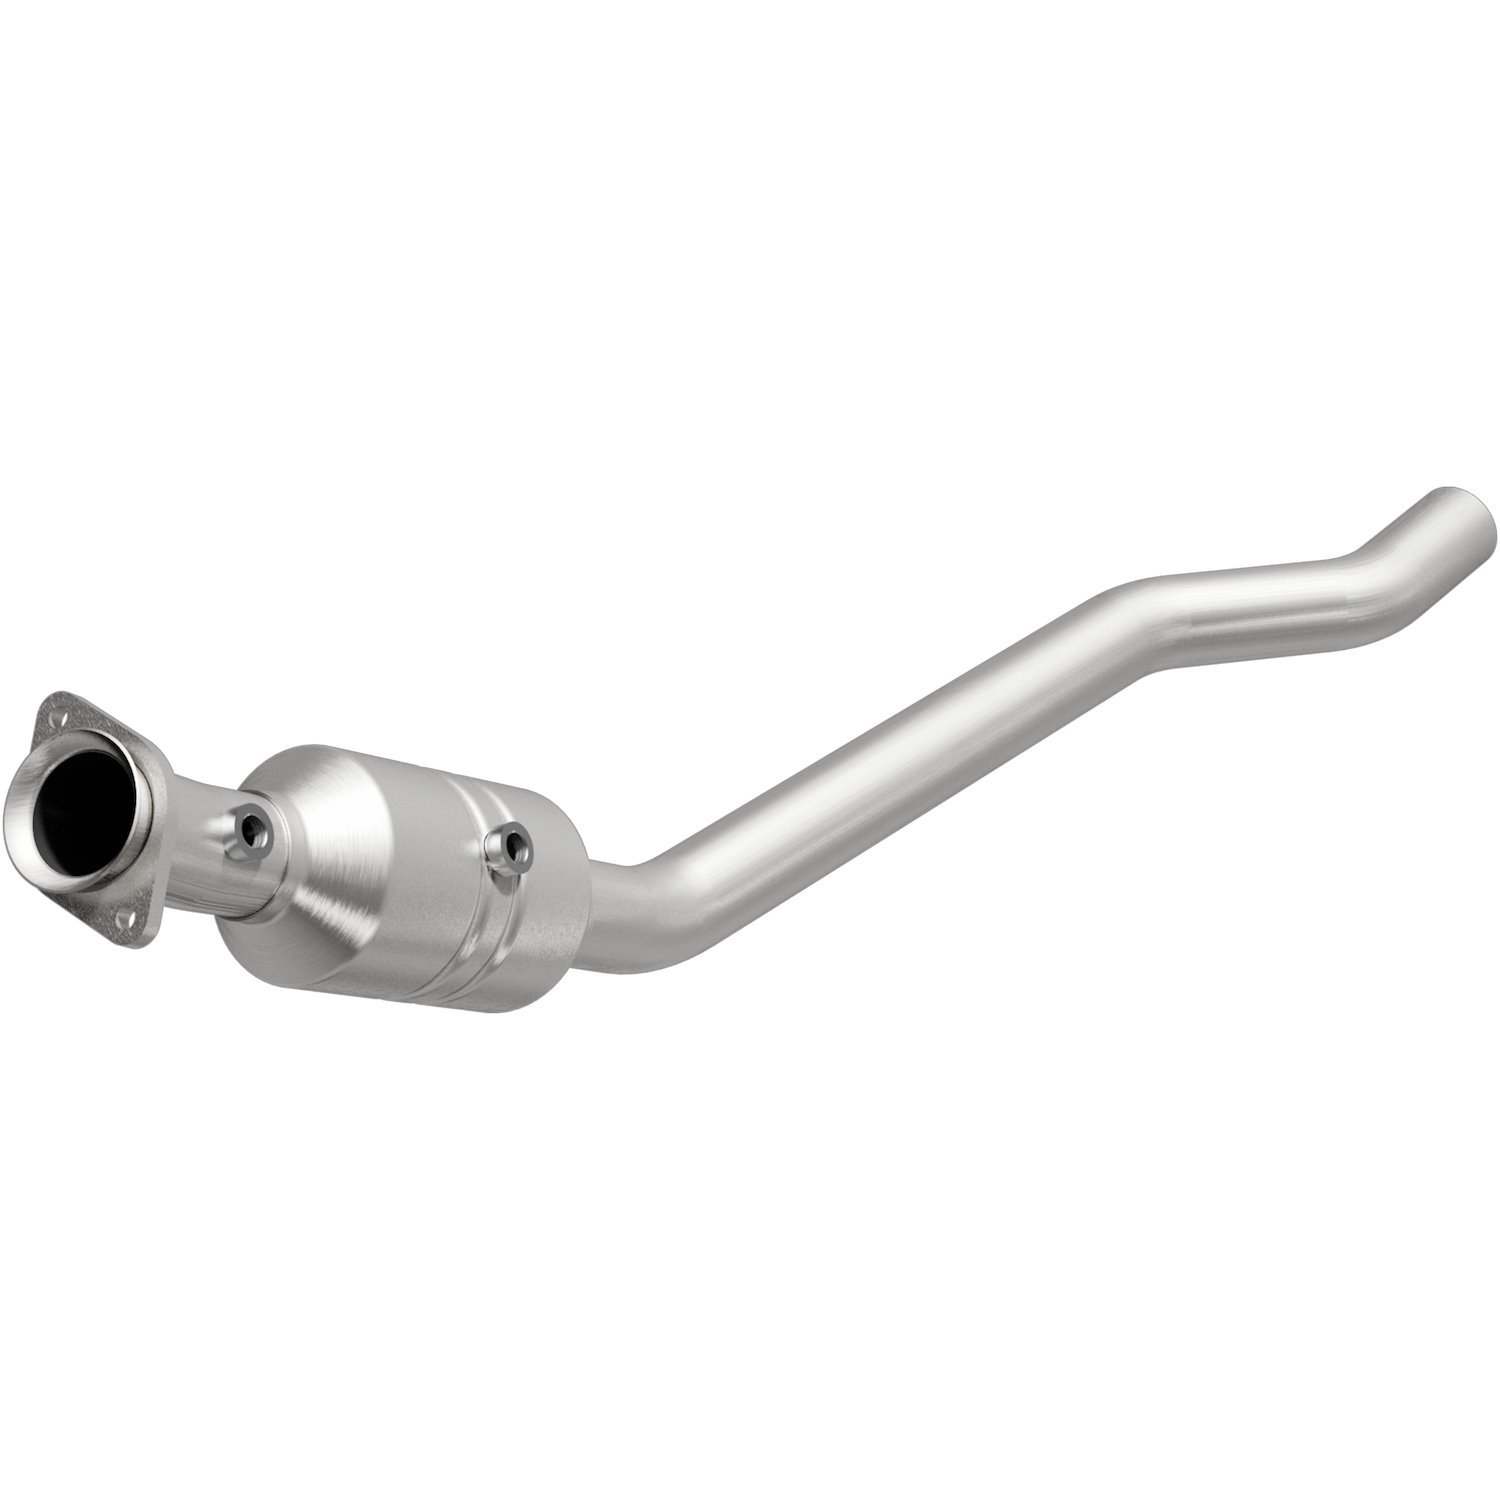 OEM Grade Federal / EPA Compliant Direct-Fit Catalytic Converter 49739